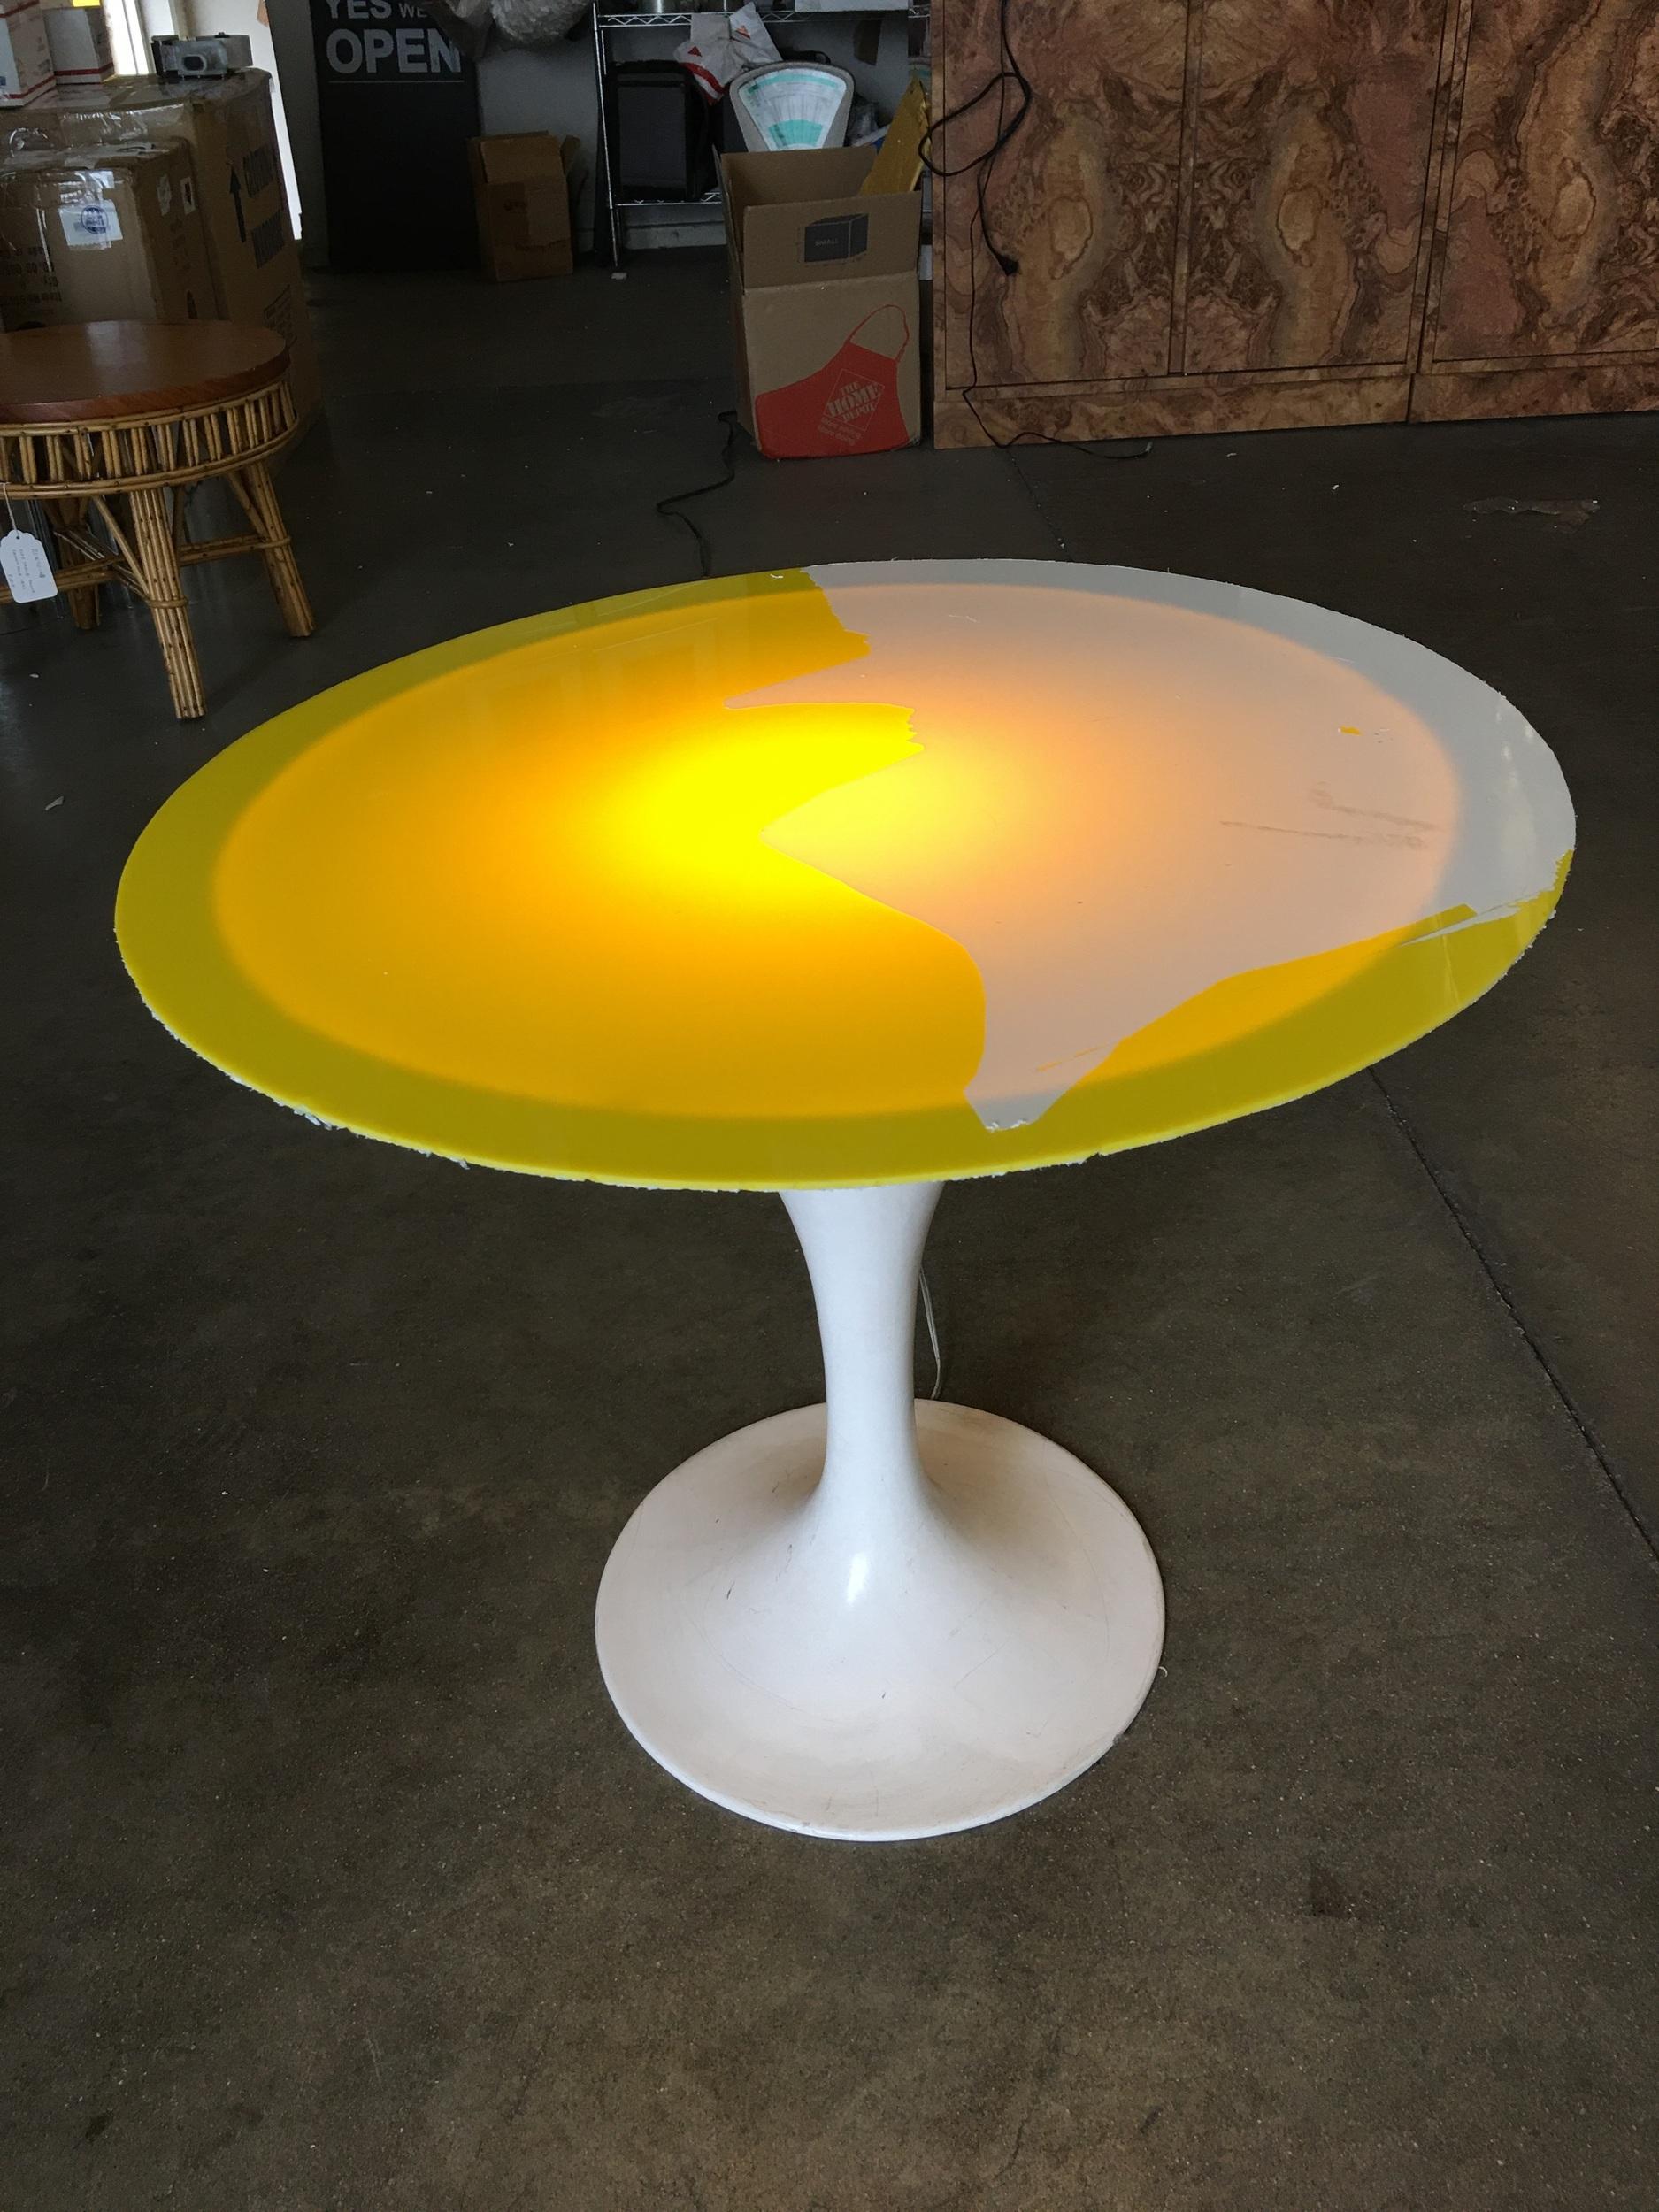 Rare light up midcentury table fashioned after the knoll tulip table. The table features a light-up table features a yellow acrylic top.